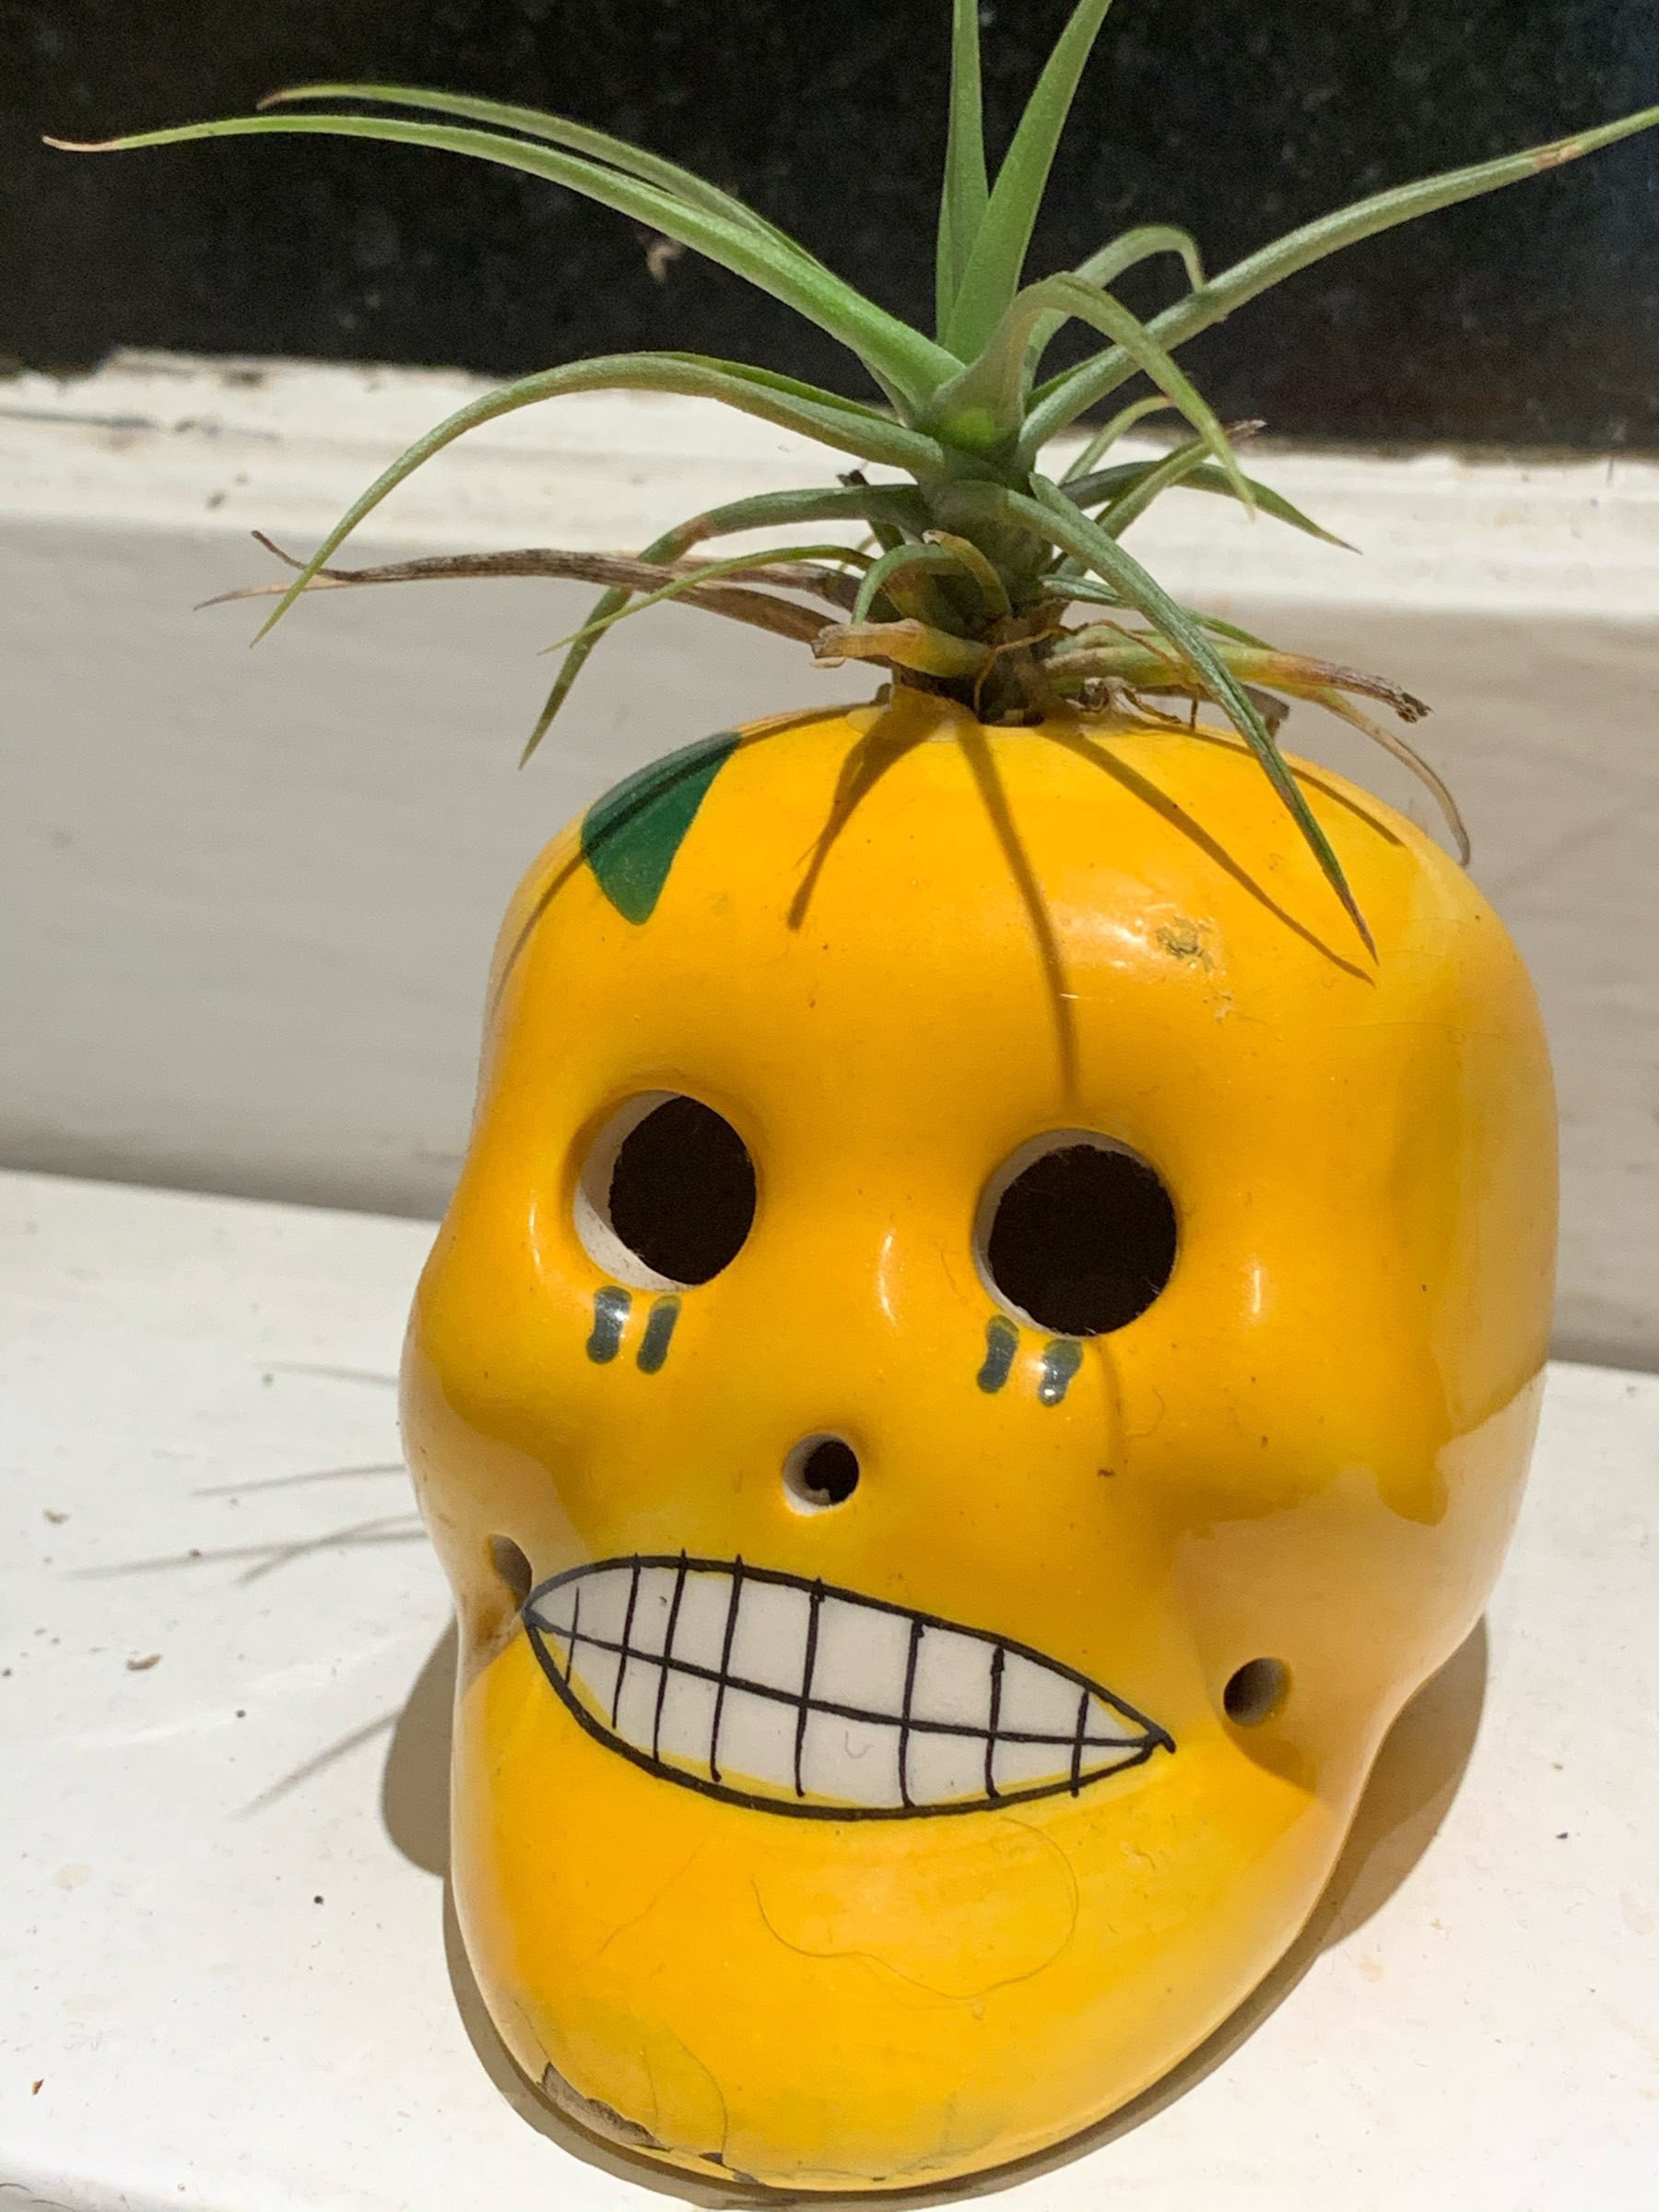 yellow ceramic skull with air plant growing out of the crown on the skull